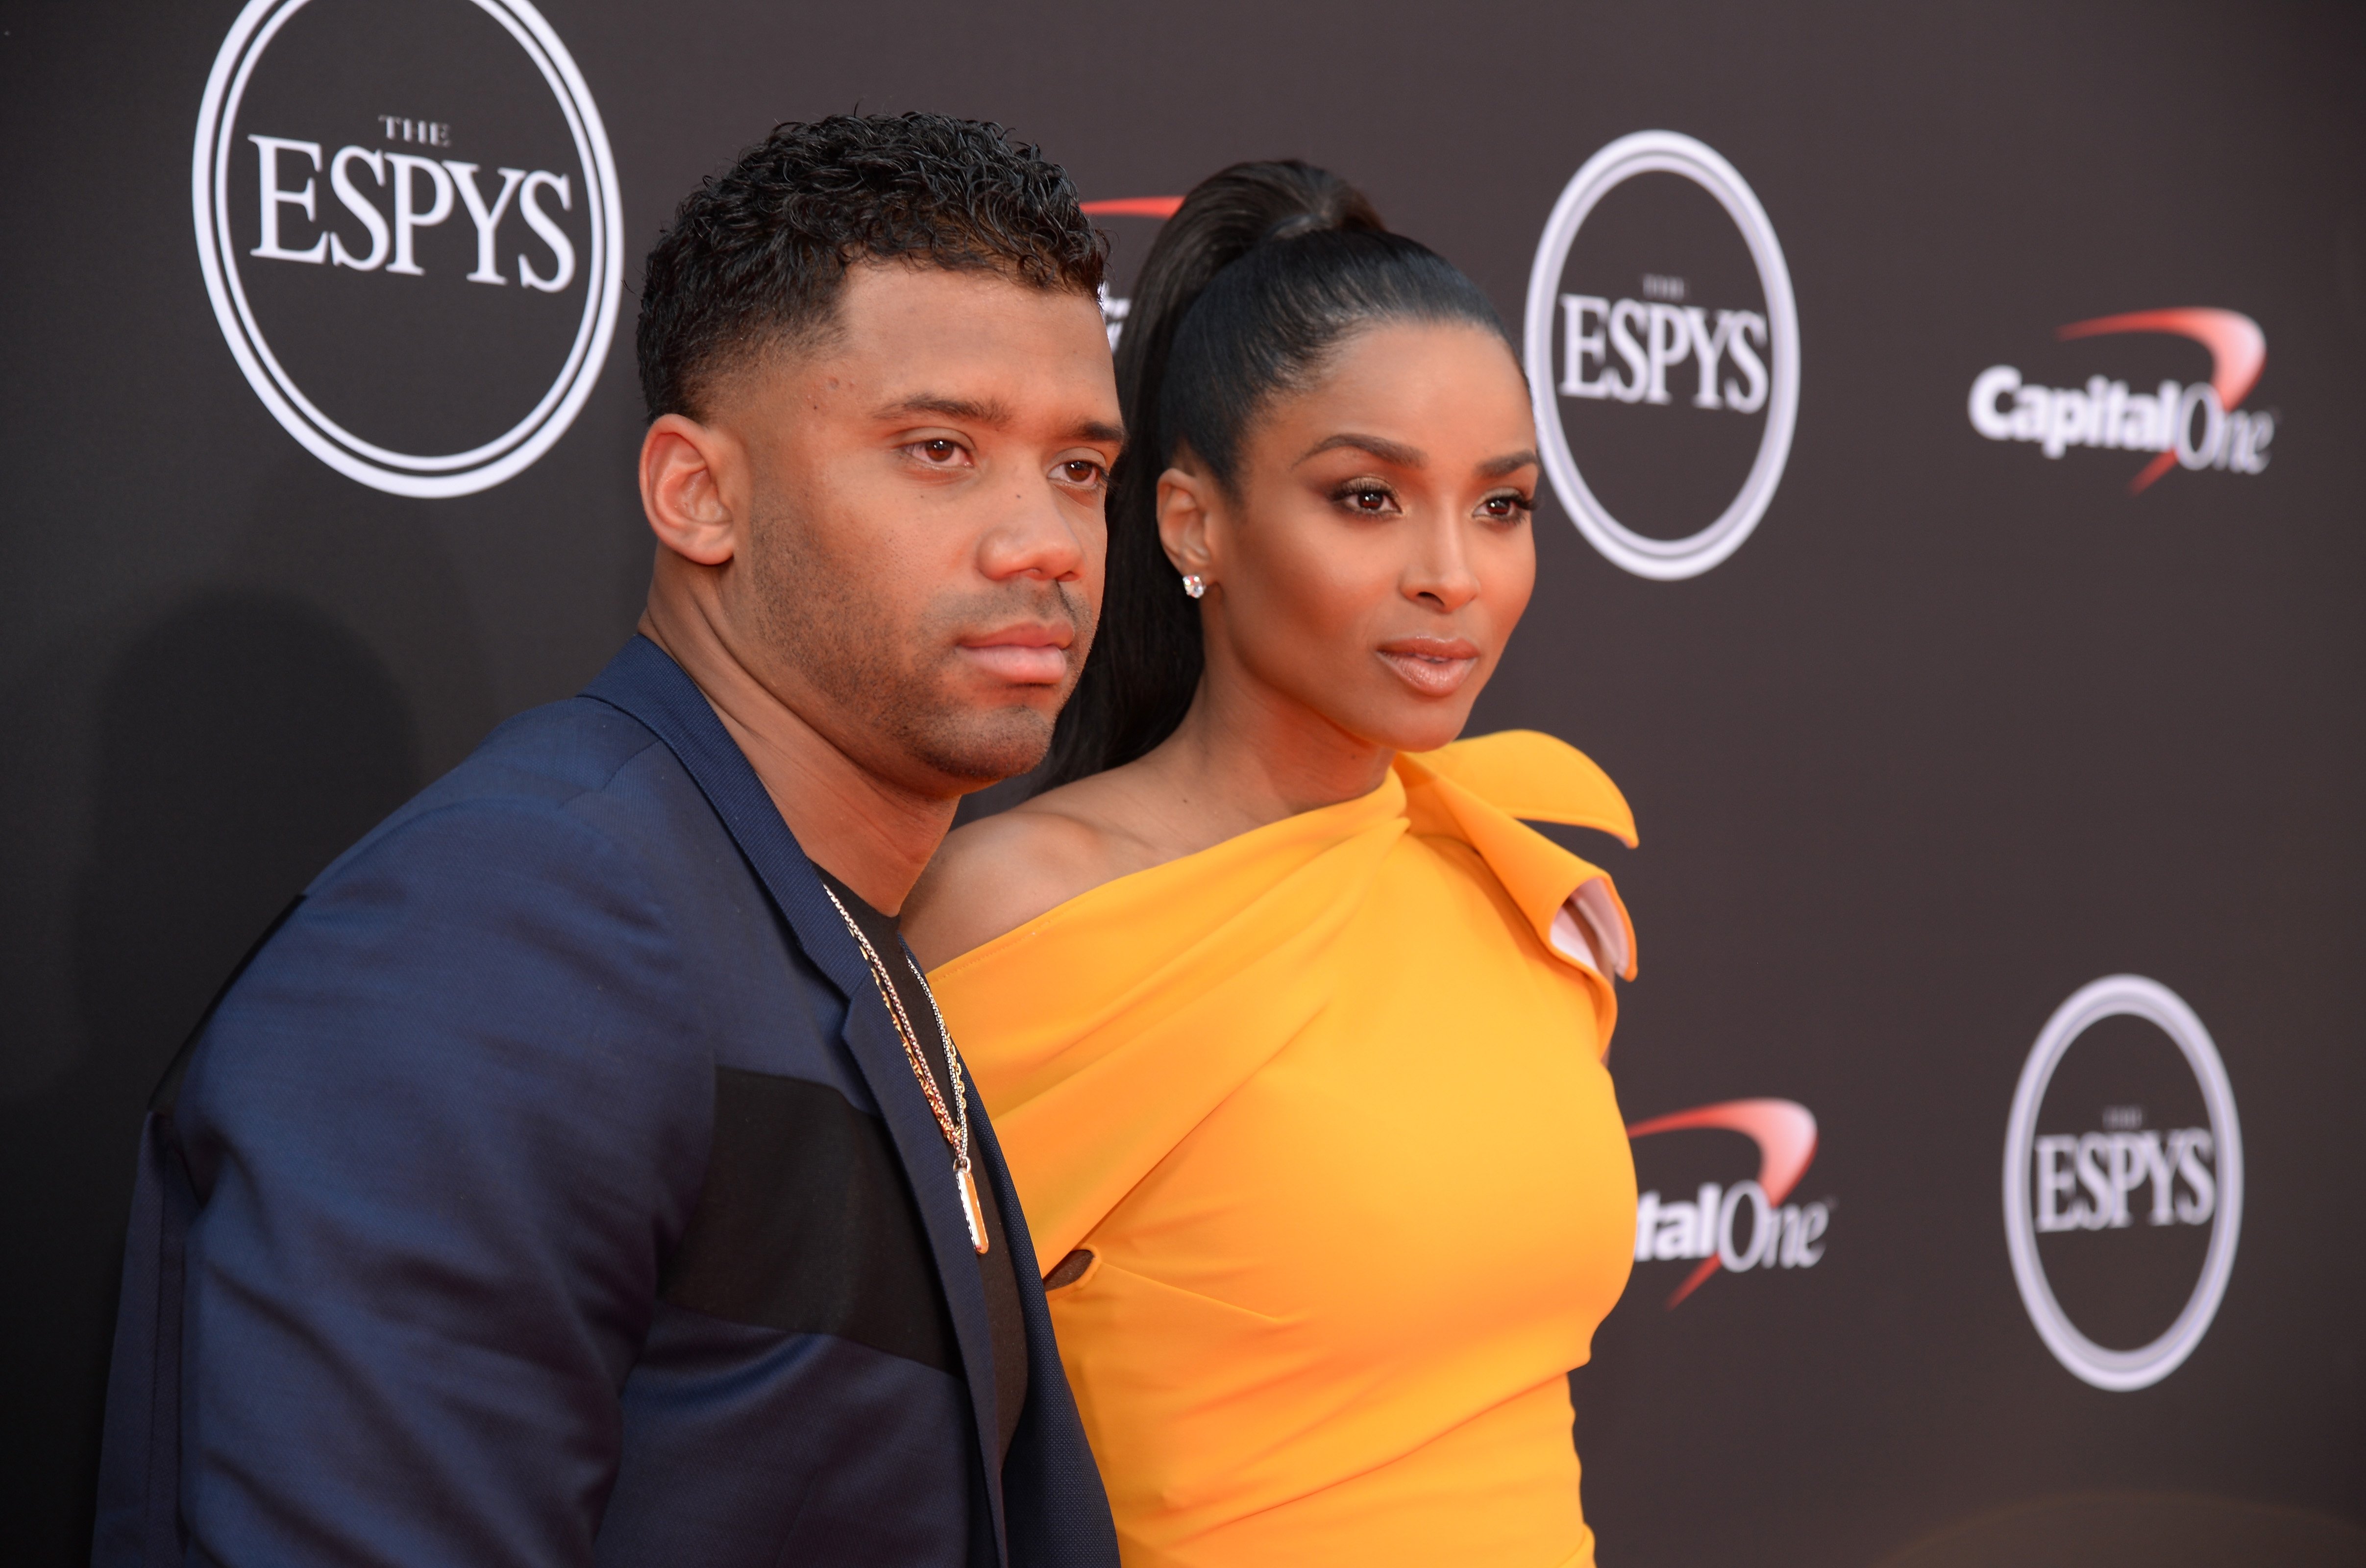 Ciara and Russell Wilson at the ESPY Awards Red Carpet Show at Microsoft Theater in Los Angeles, California on July 18, 2018. | Photo: Getty Images